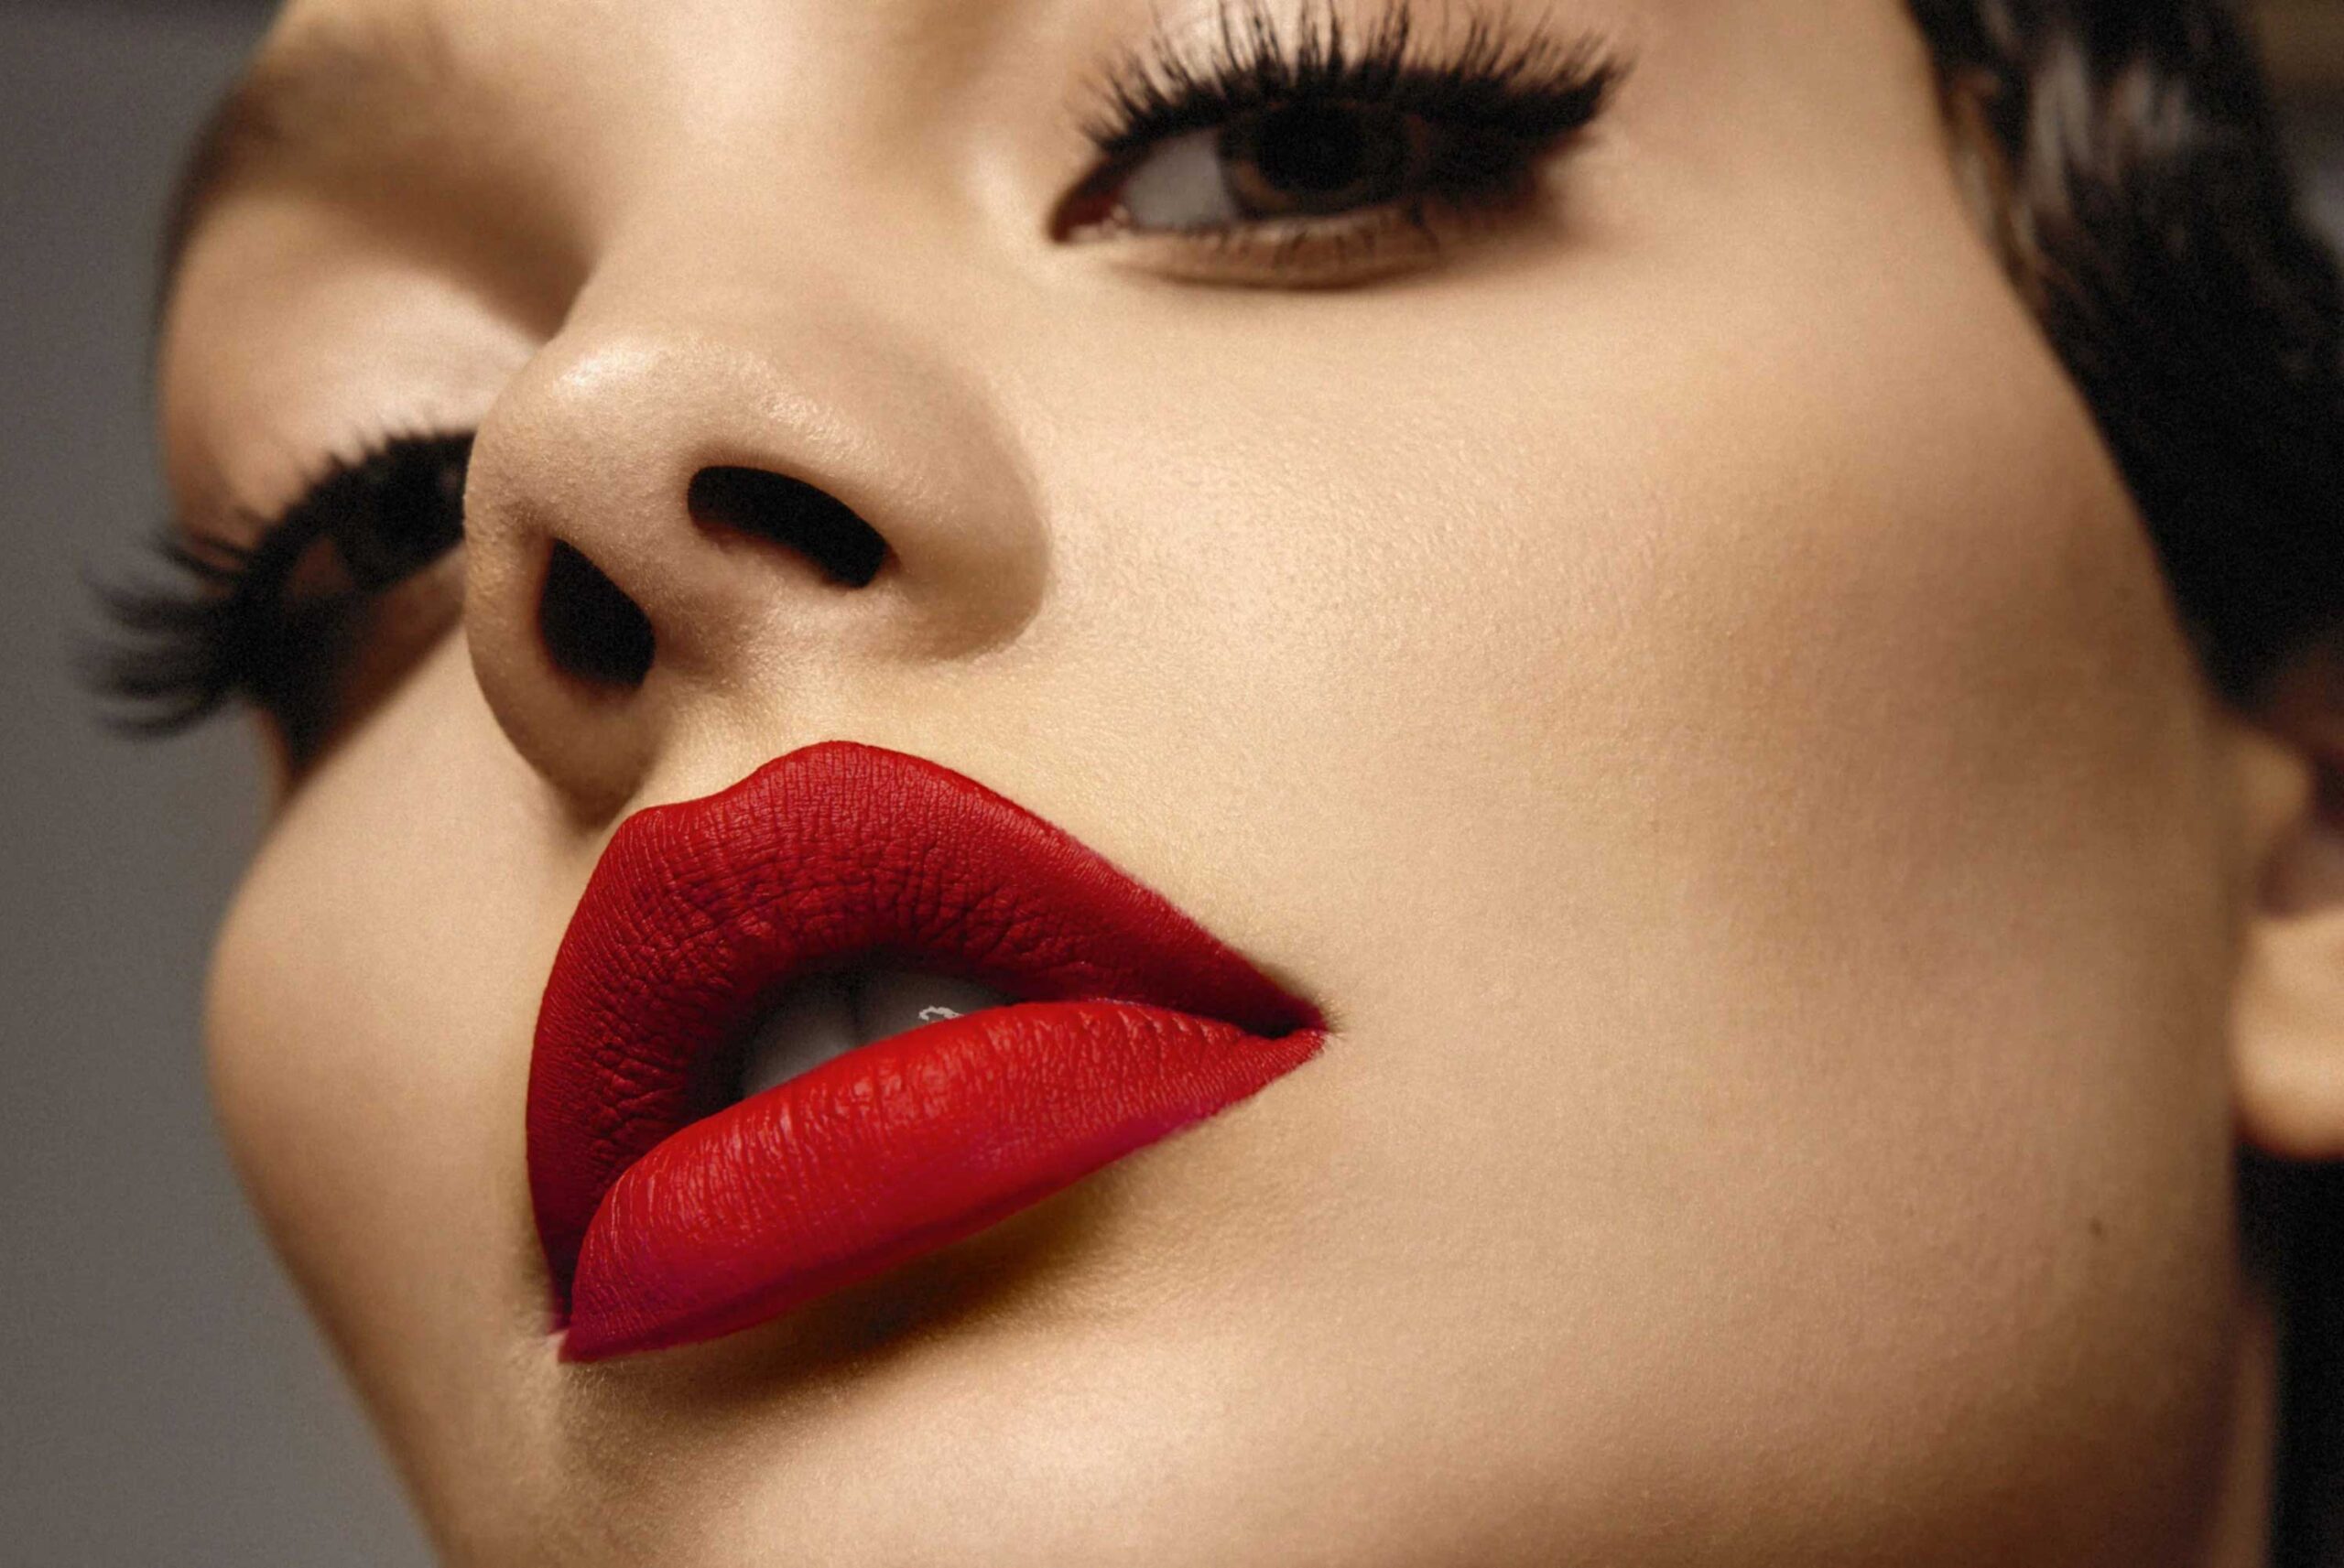 Inspiration For a Good-Old Natural Red Lip Makeup